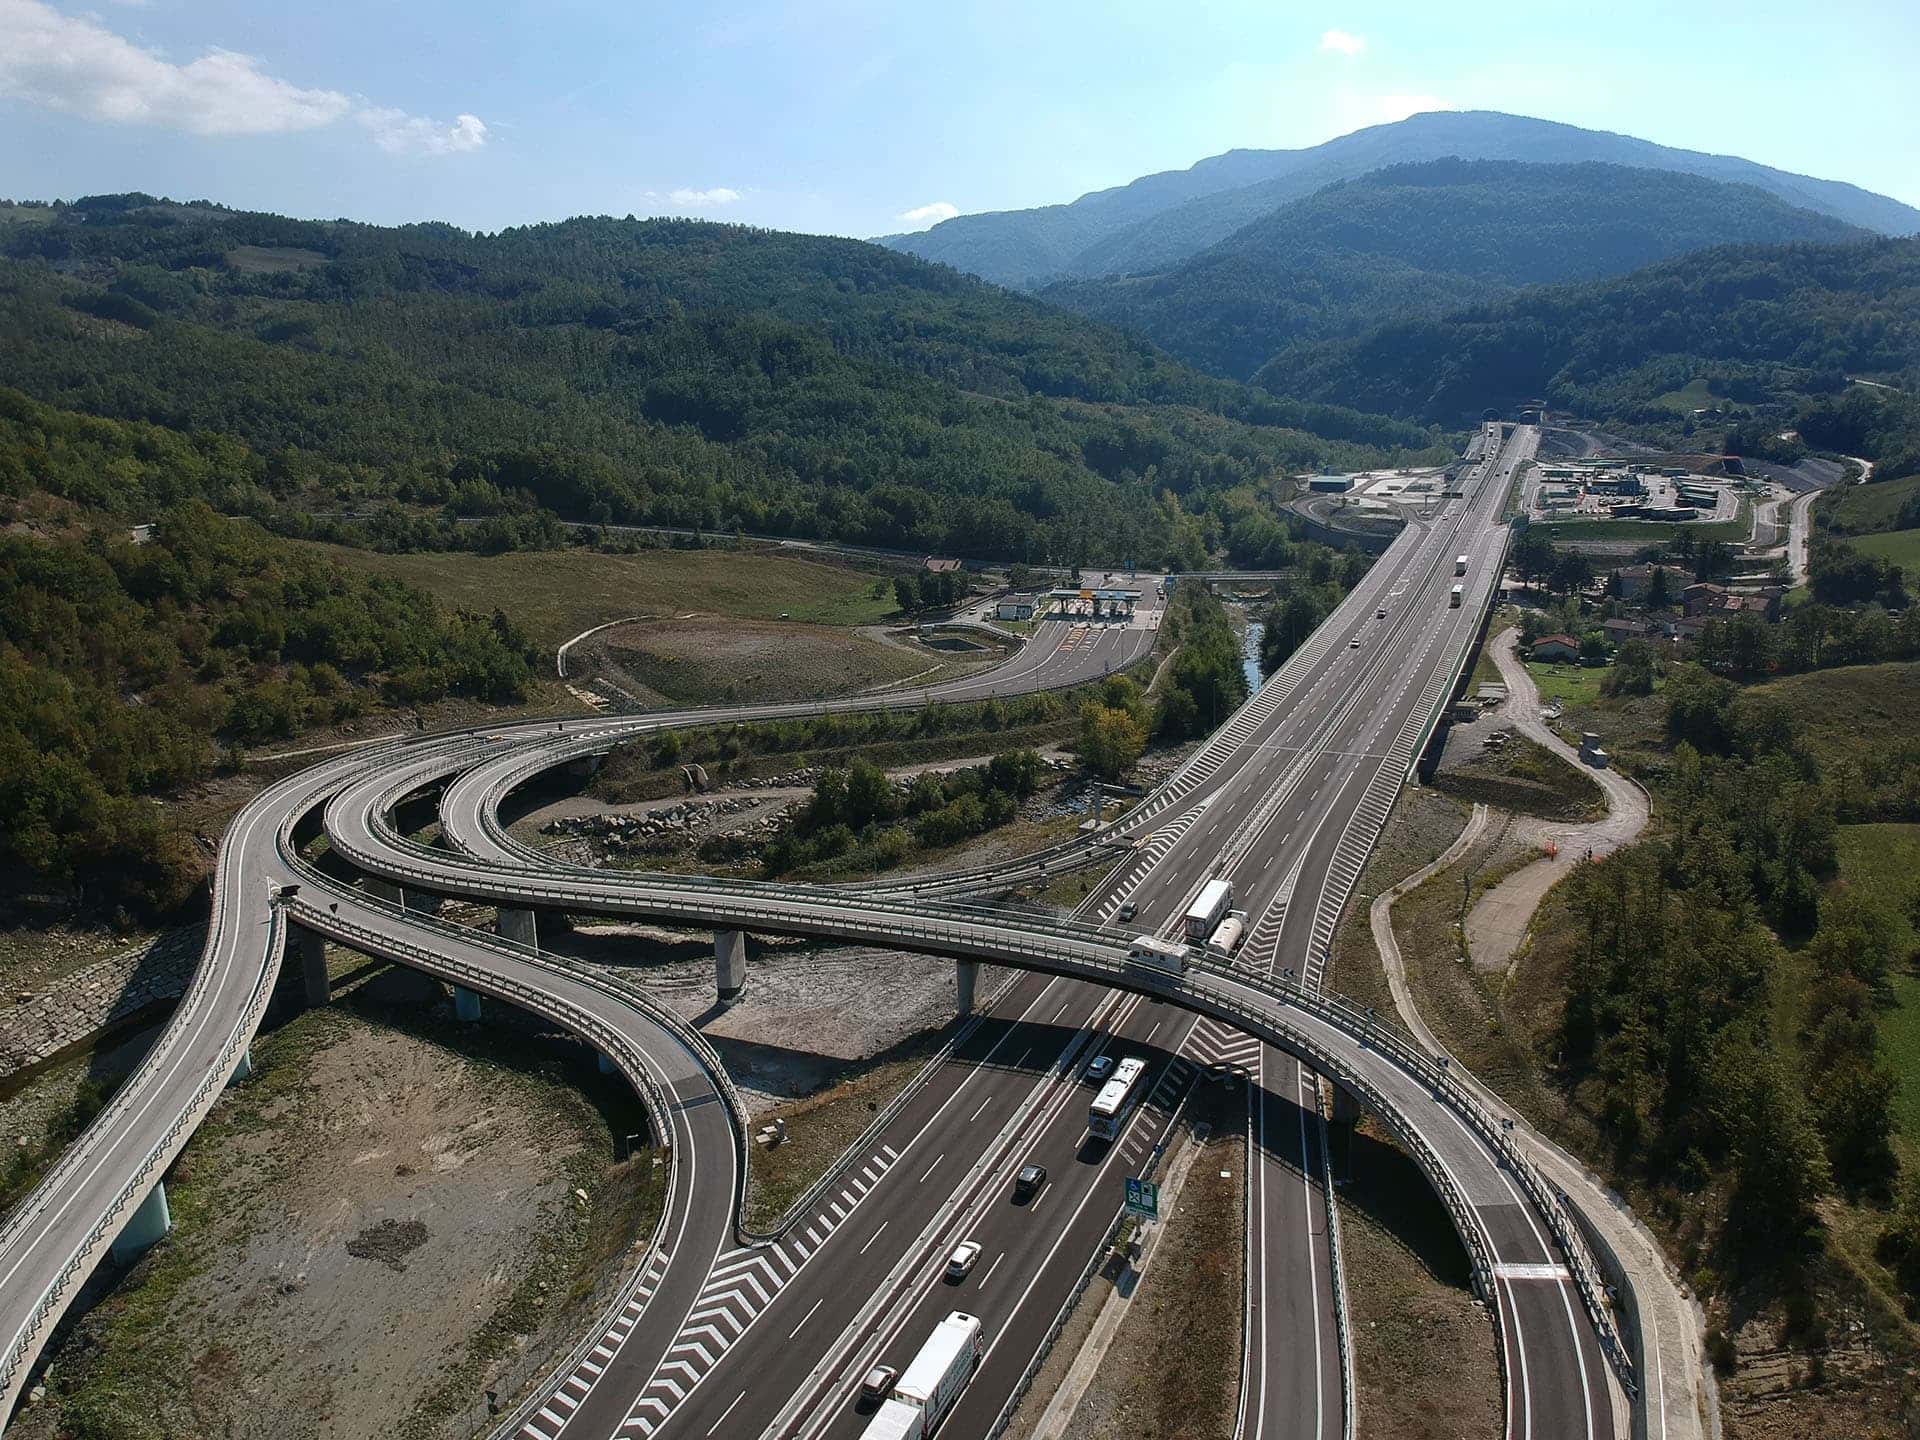 Italy lags behind on transport infrastructure investments - We Build Value